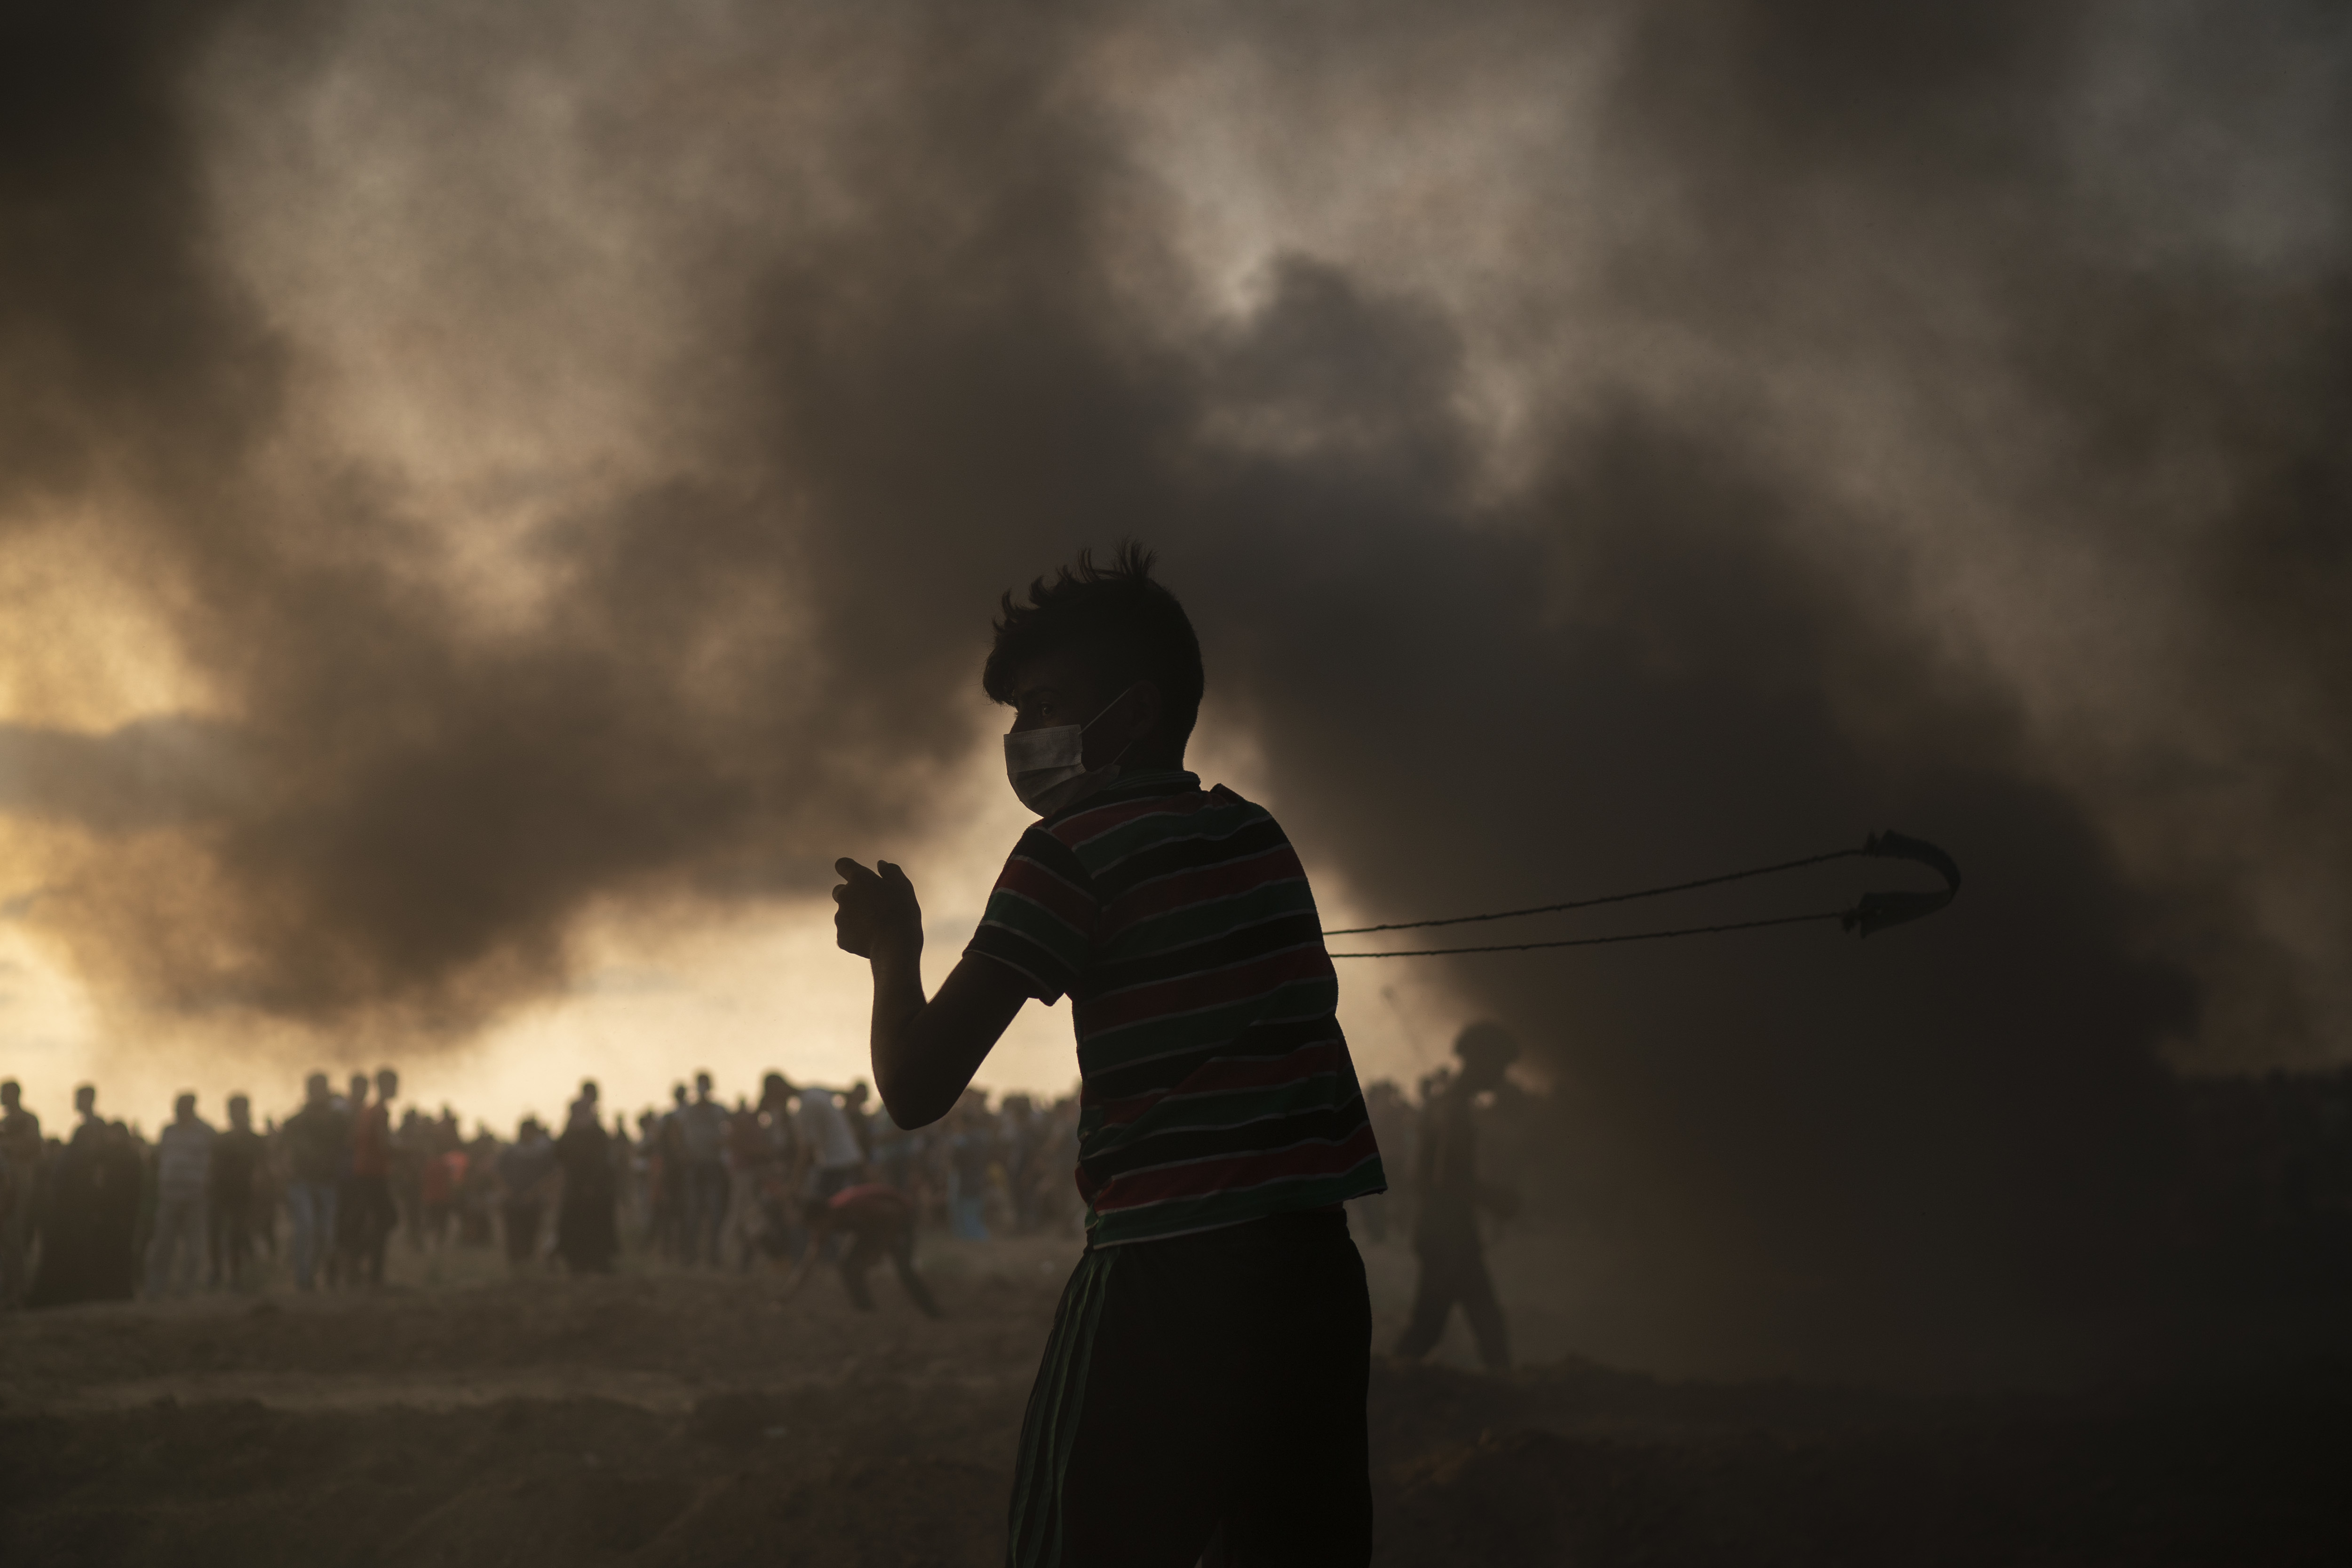 A young protester hurls stones while others burn tires during a protest at Gaza Strip's border with Israel, east of Gaza City, Friday, Aug. 31, 2018. Gaza's Health Ministry says Israeli gunfire wounded about 80 Palestinians at a weekly protest along the border with Israel. (AP Photo/Felipe Dana)